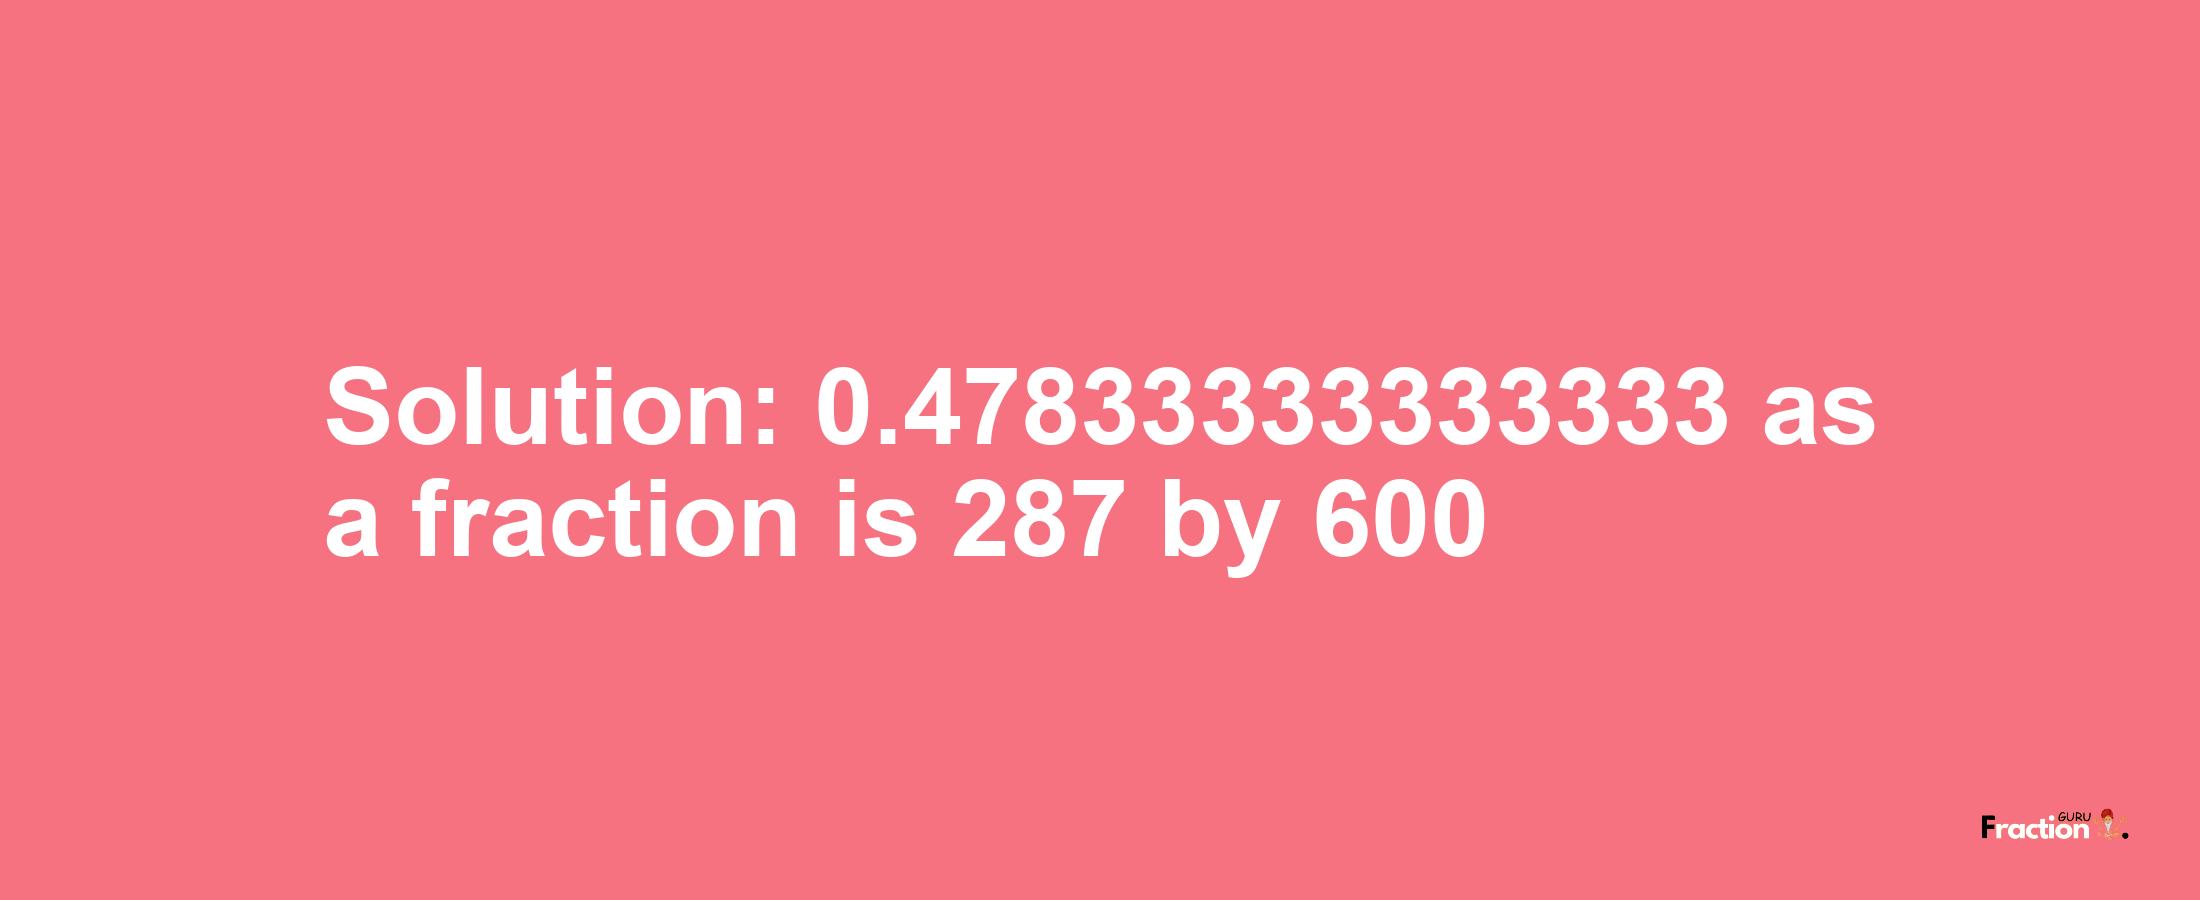 Solution:0.47833333333333 as a fraction is 287/600